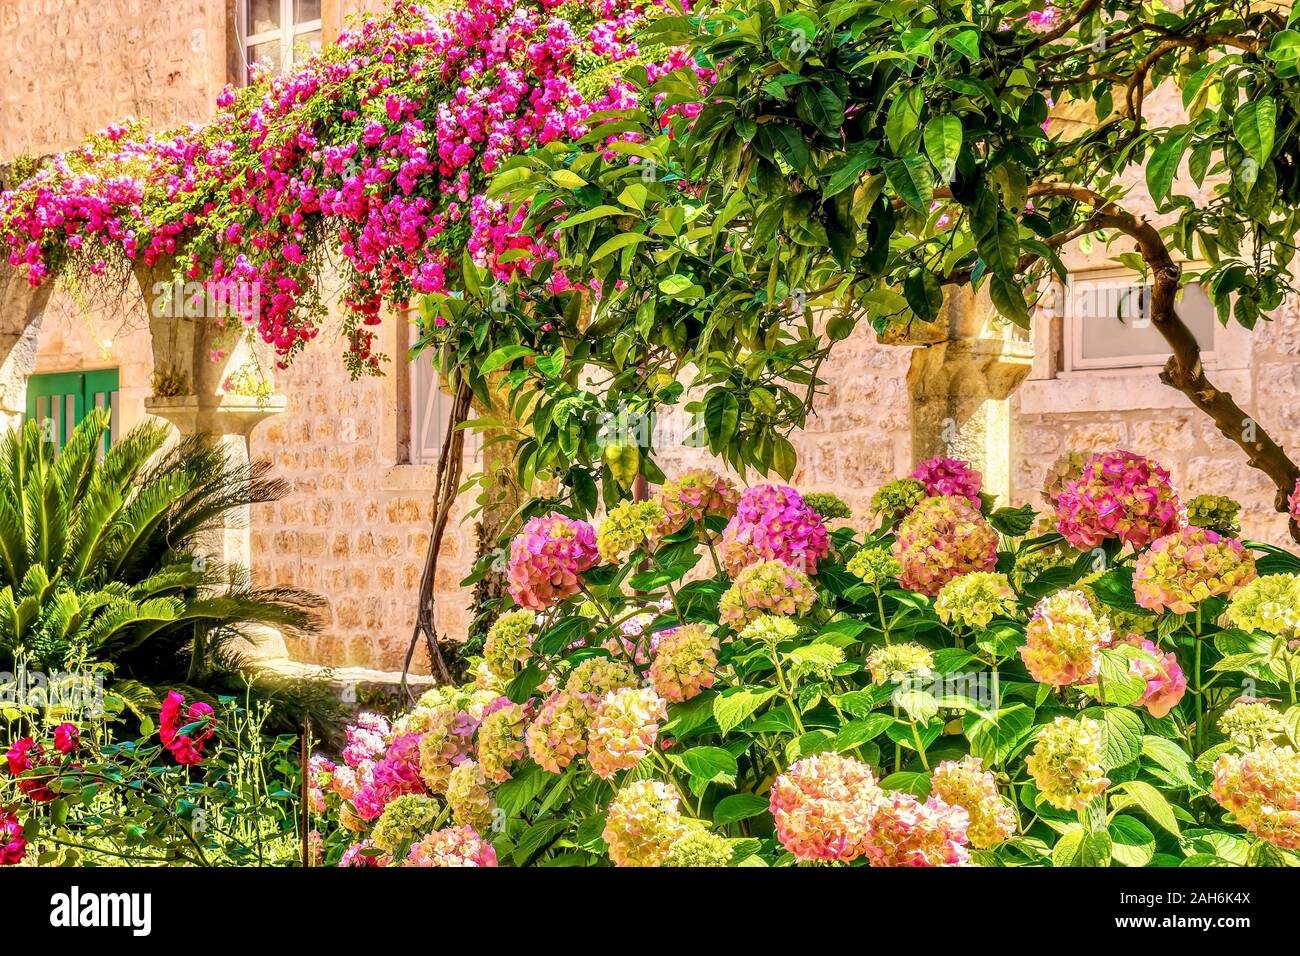 A pretty flower garden scene with a pink color theme, including bougainvillea, hydrangea and roses. Stock Photo